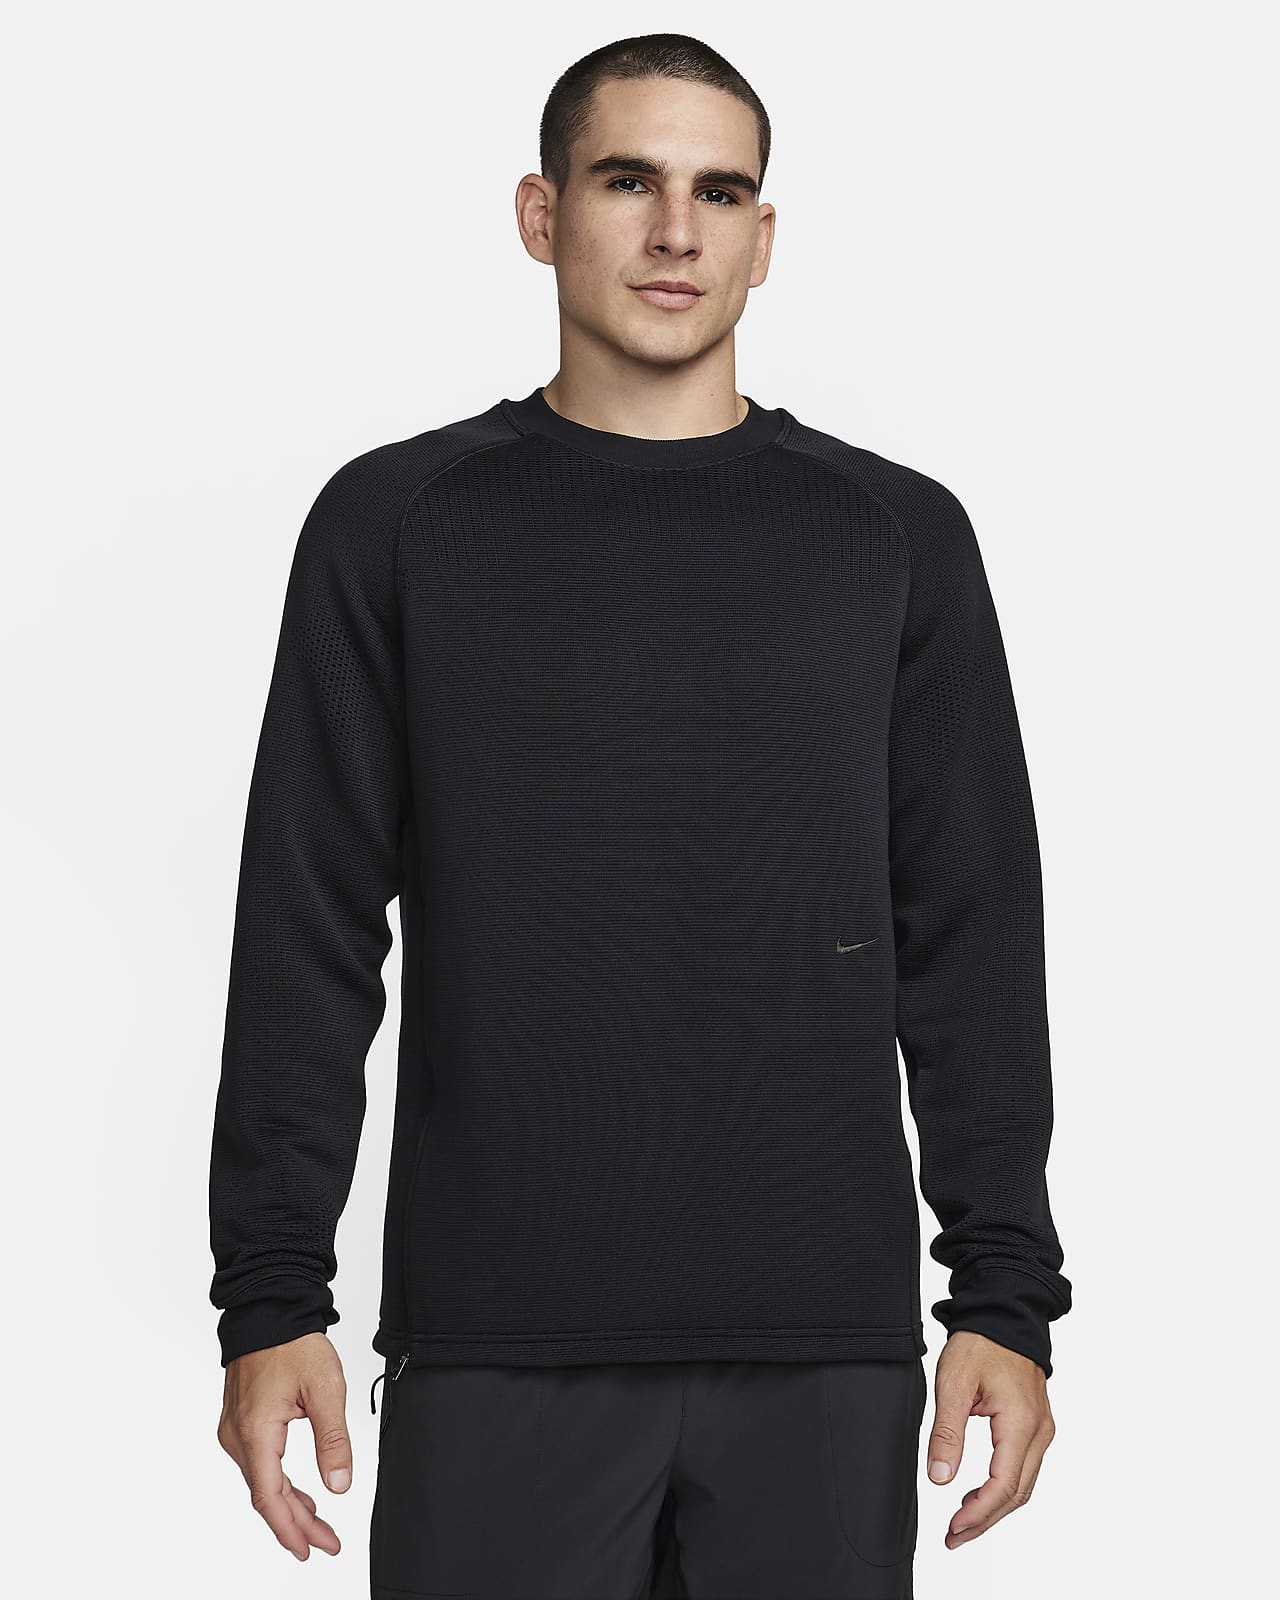 Haut Therma-FIT ADV Nike A.P.S. pour homme